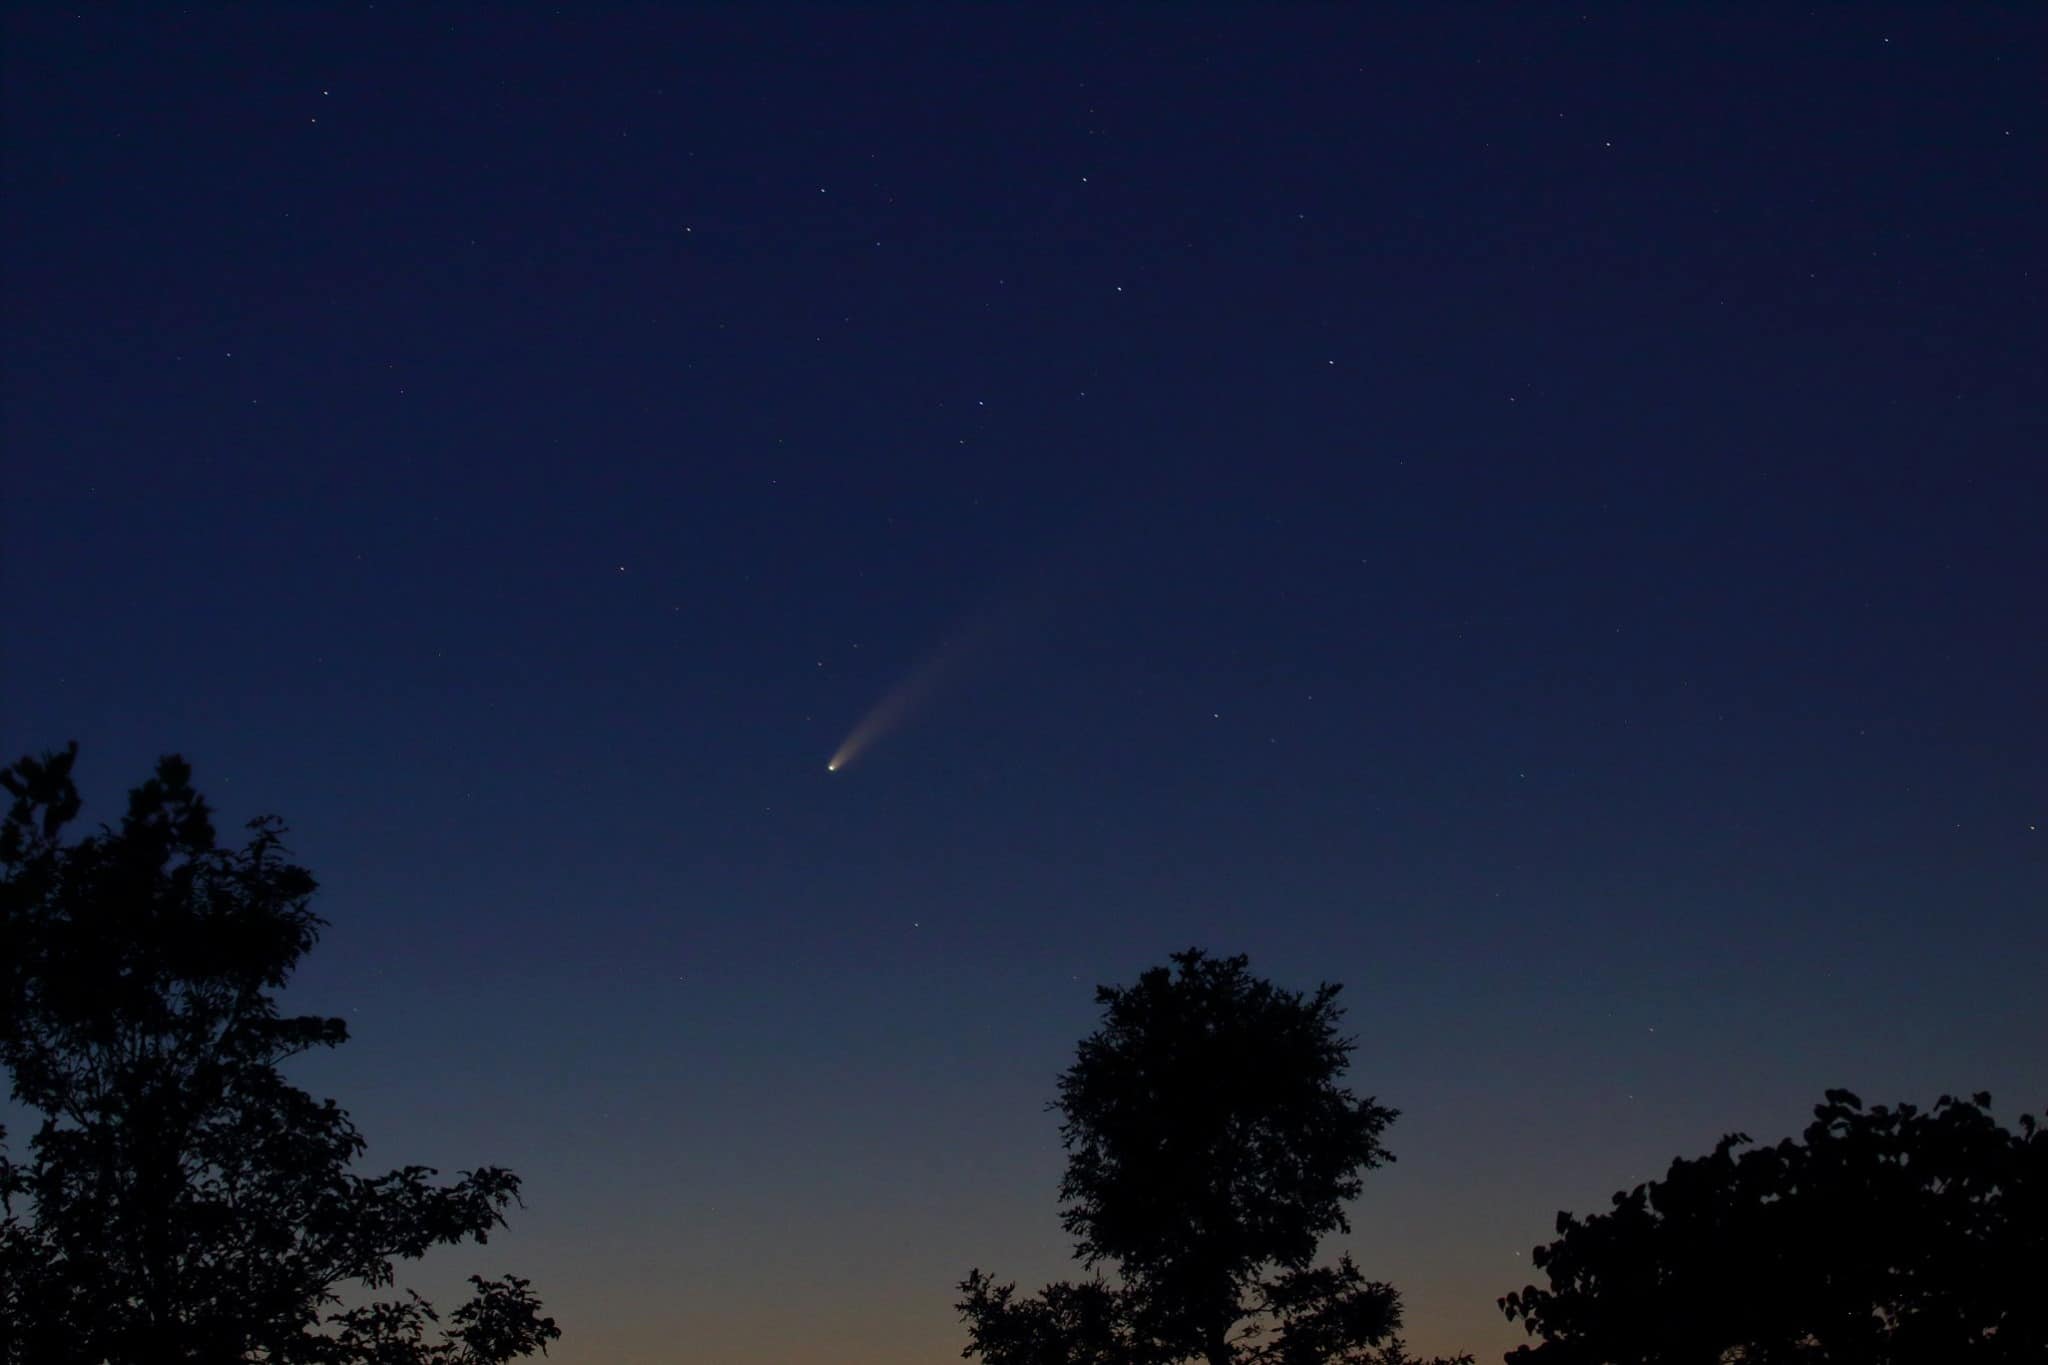 Evening sky with a shooting star